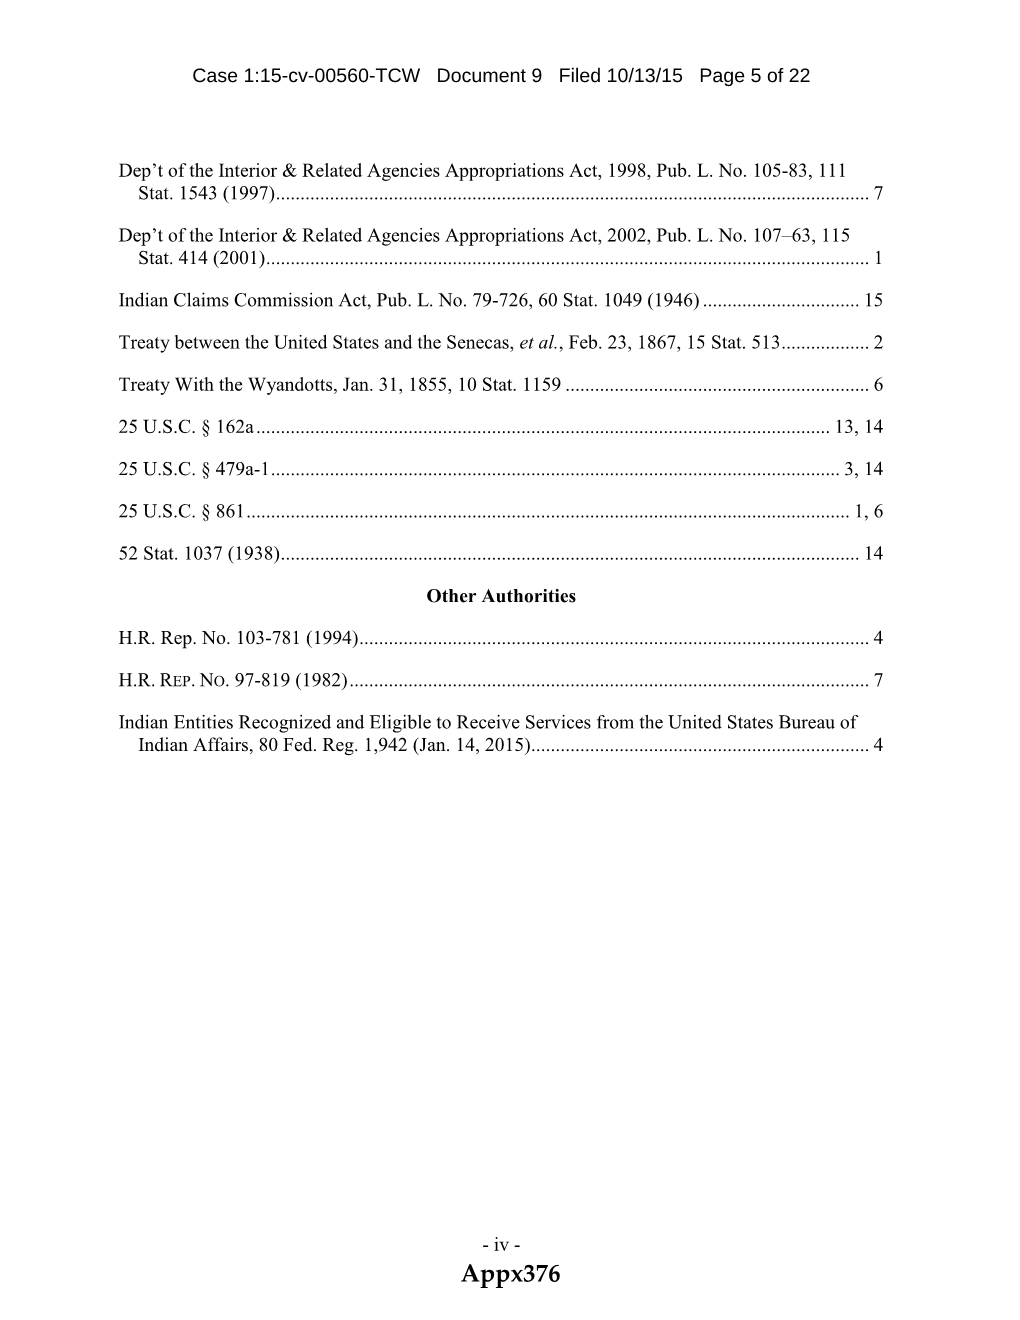 Appx376 Case 1:15-Cv-00560-TCW Document 9 Filed 10/13/15 Page 6 of 22